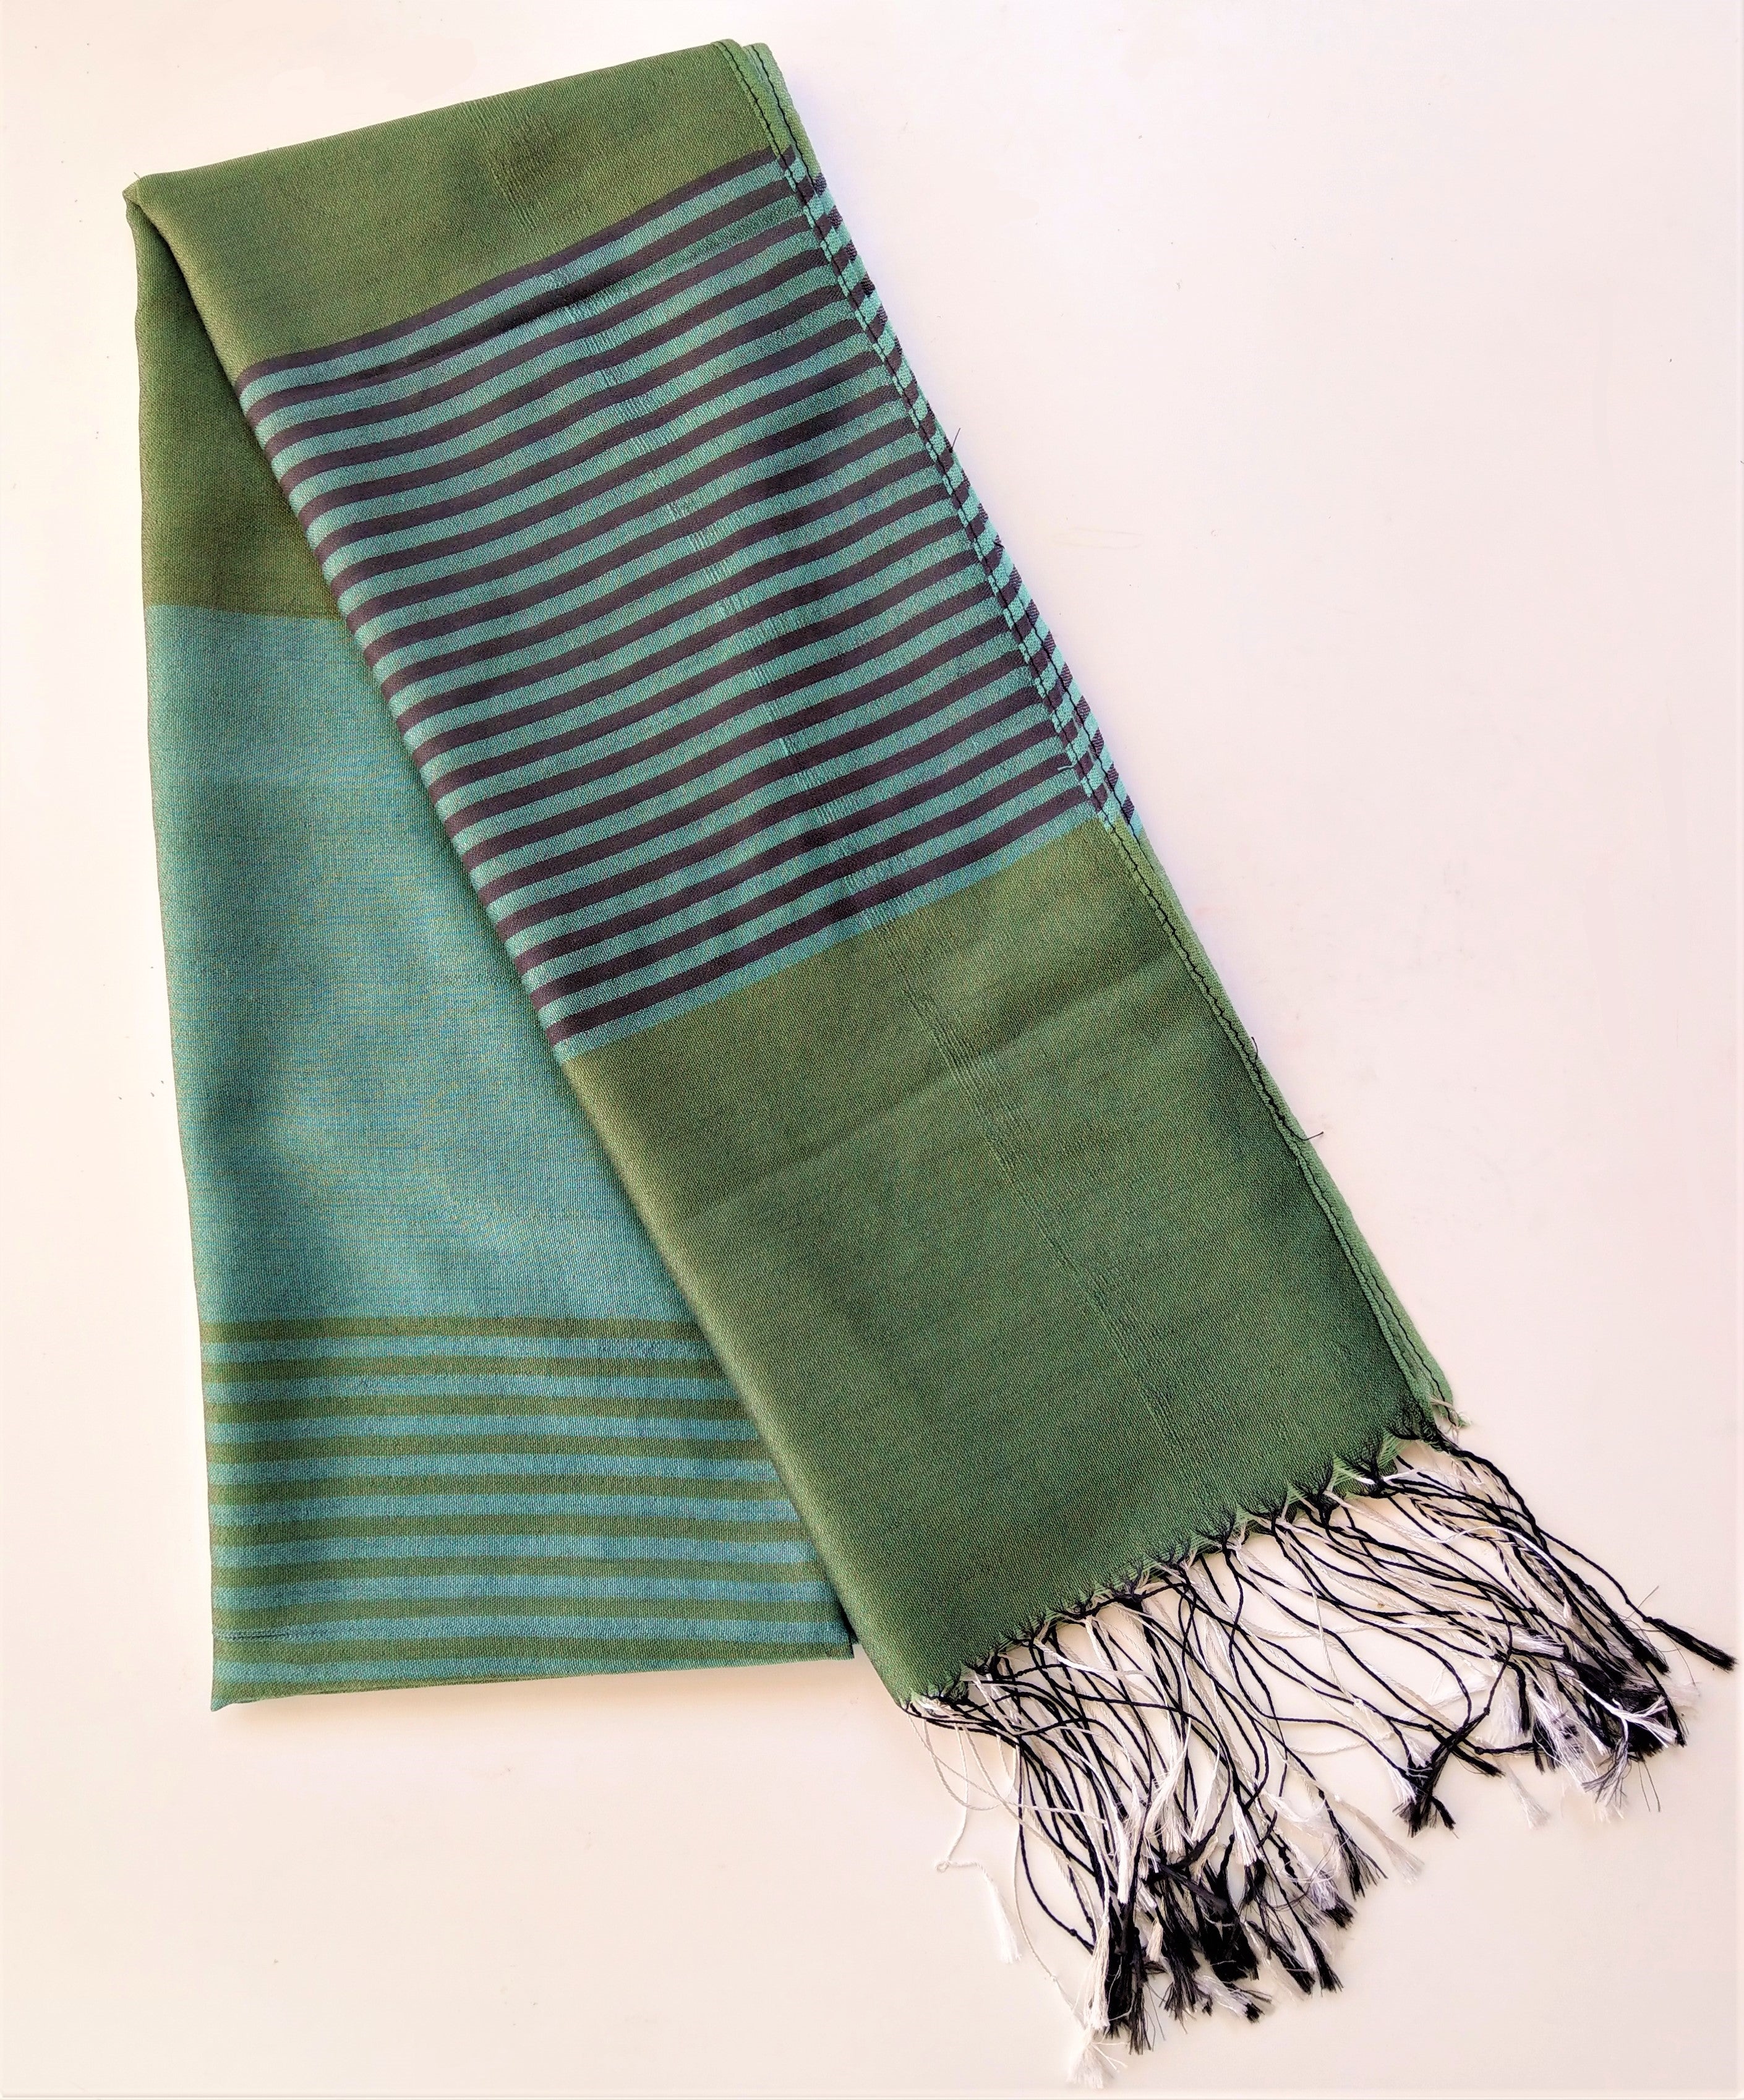 Striped Scarf in Shades of Green